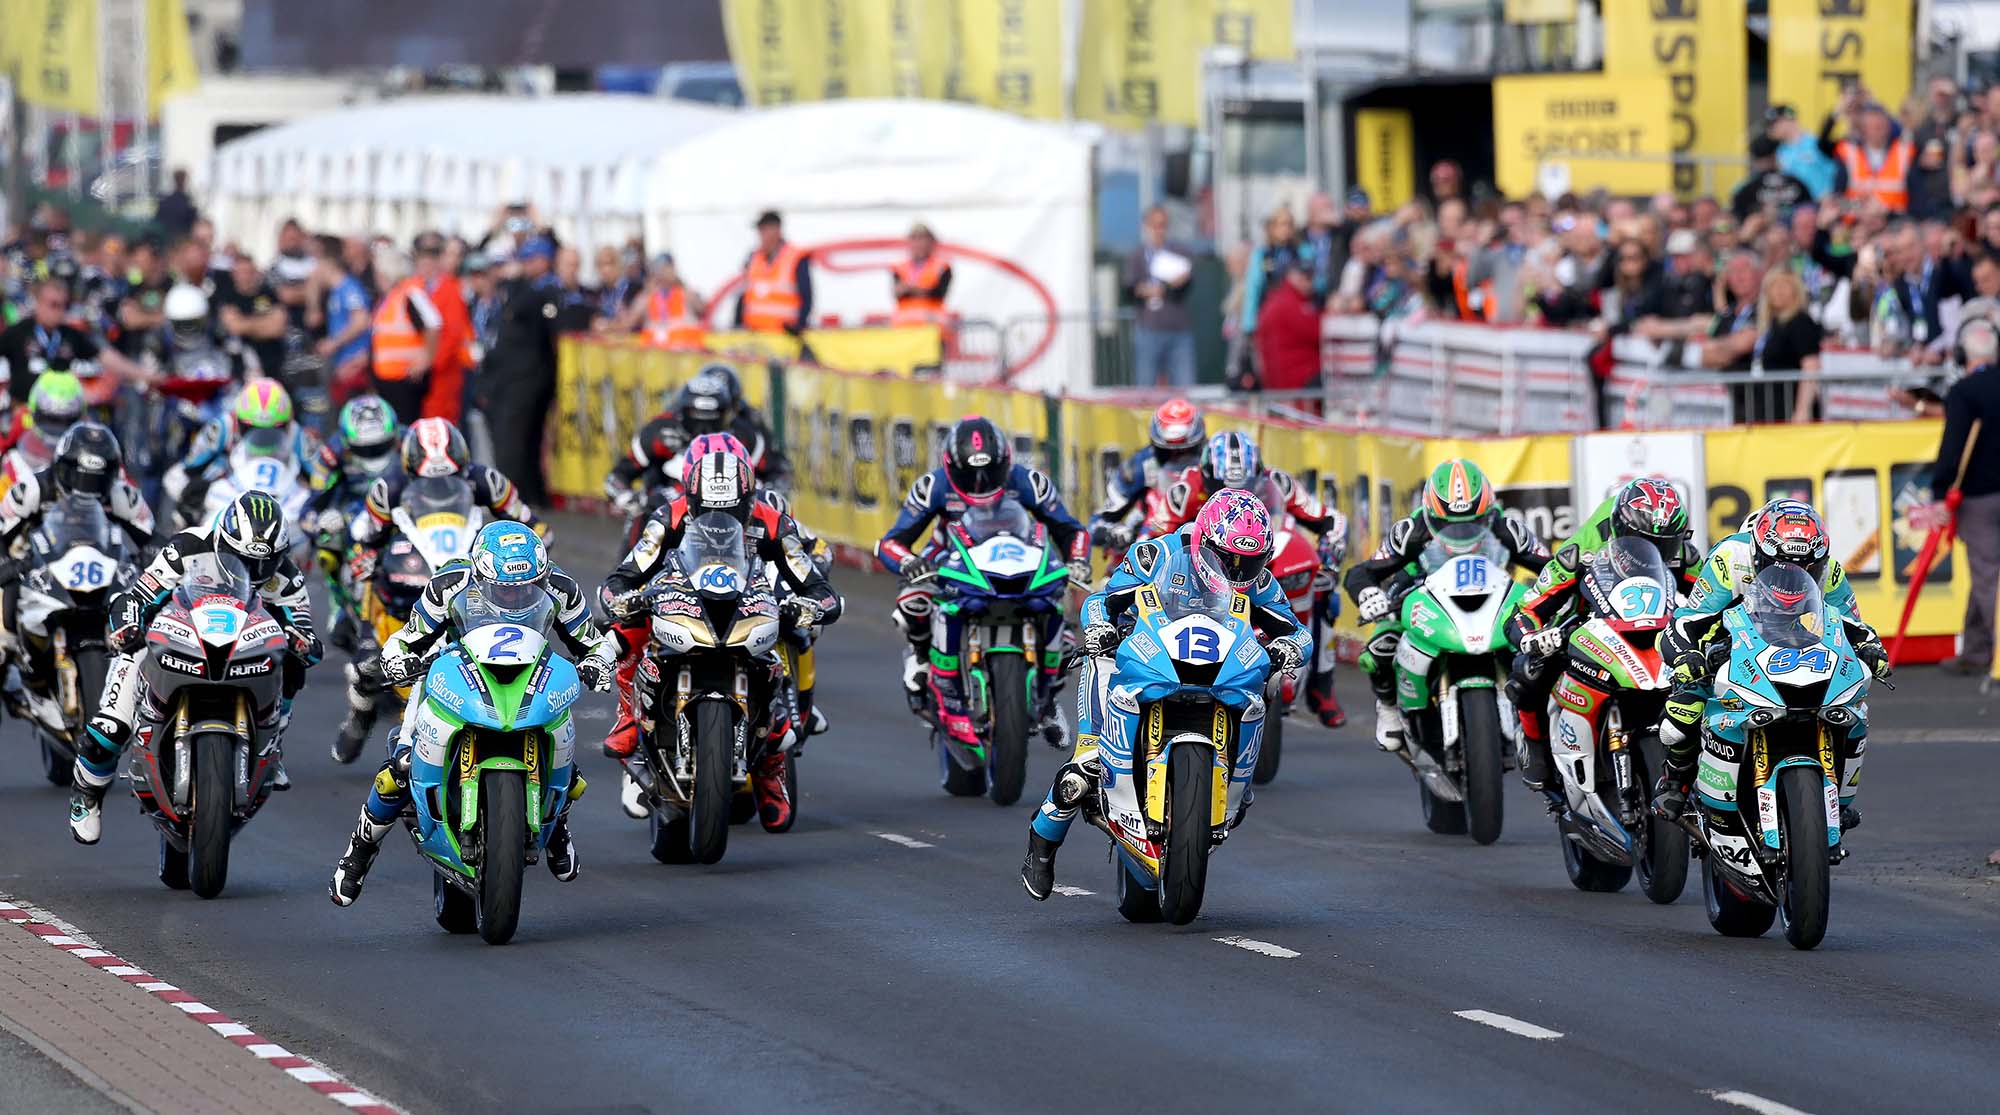 About the NW200 North West 200